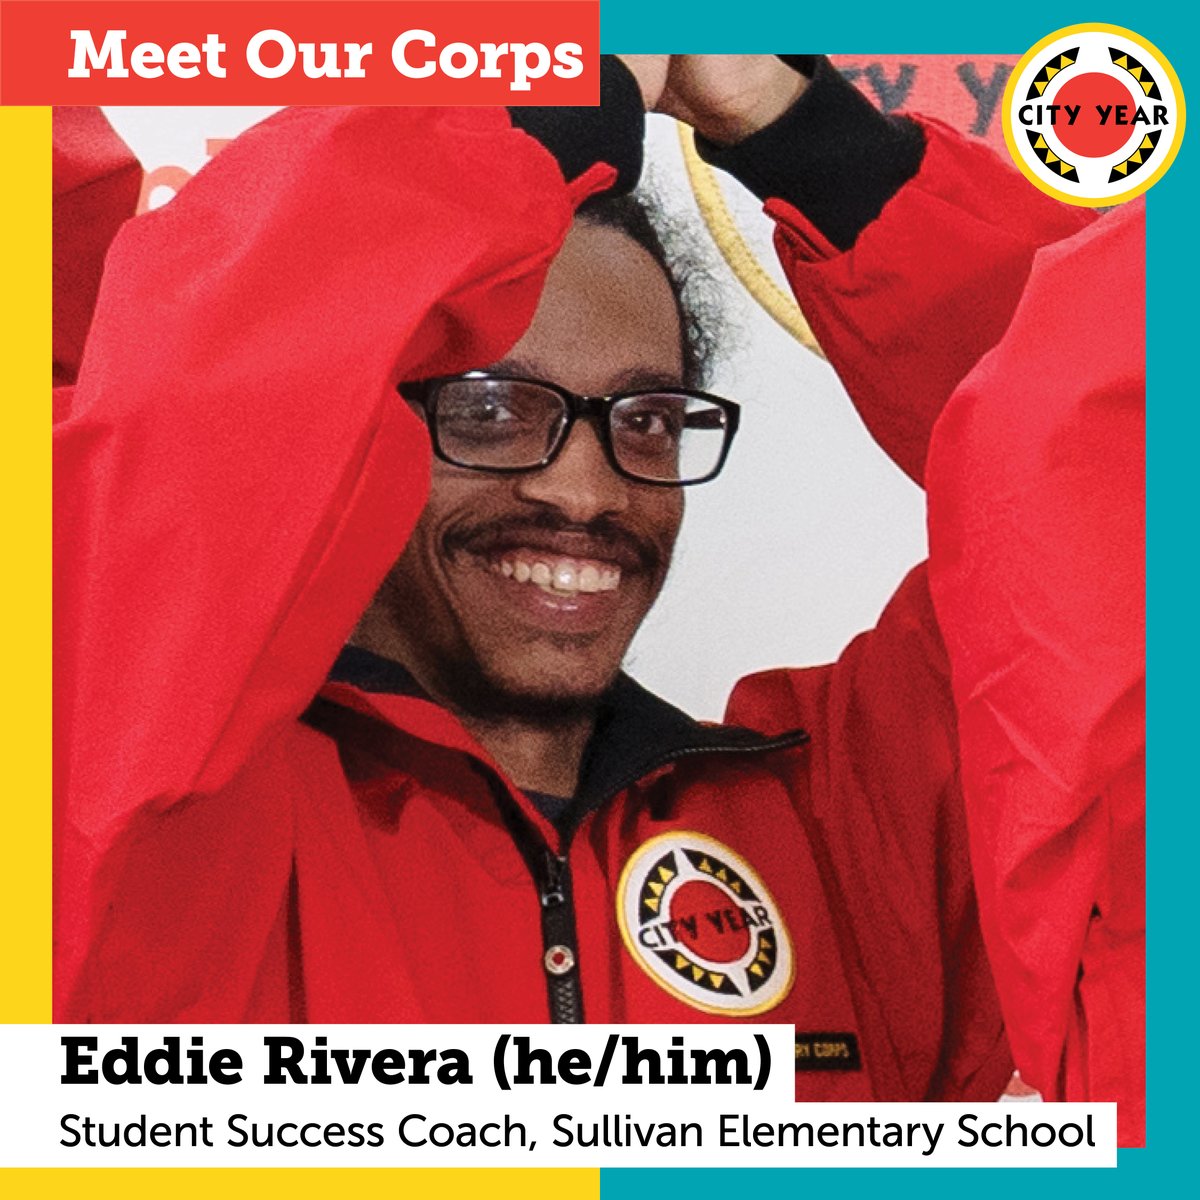 'My favorite part of working with students is being able to read along with the kids in class and see how excited and invested they get with the stories we read.” -Eddie Rivera, Student Success Coach at Sullivan Elementary #WhyIServeCYP #ApplyNow cityyear.org/apply-now/